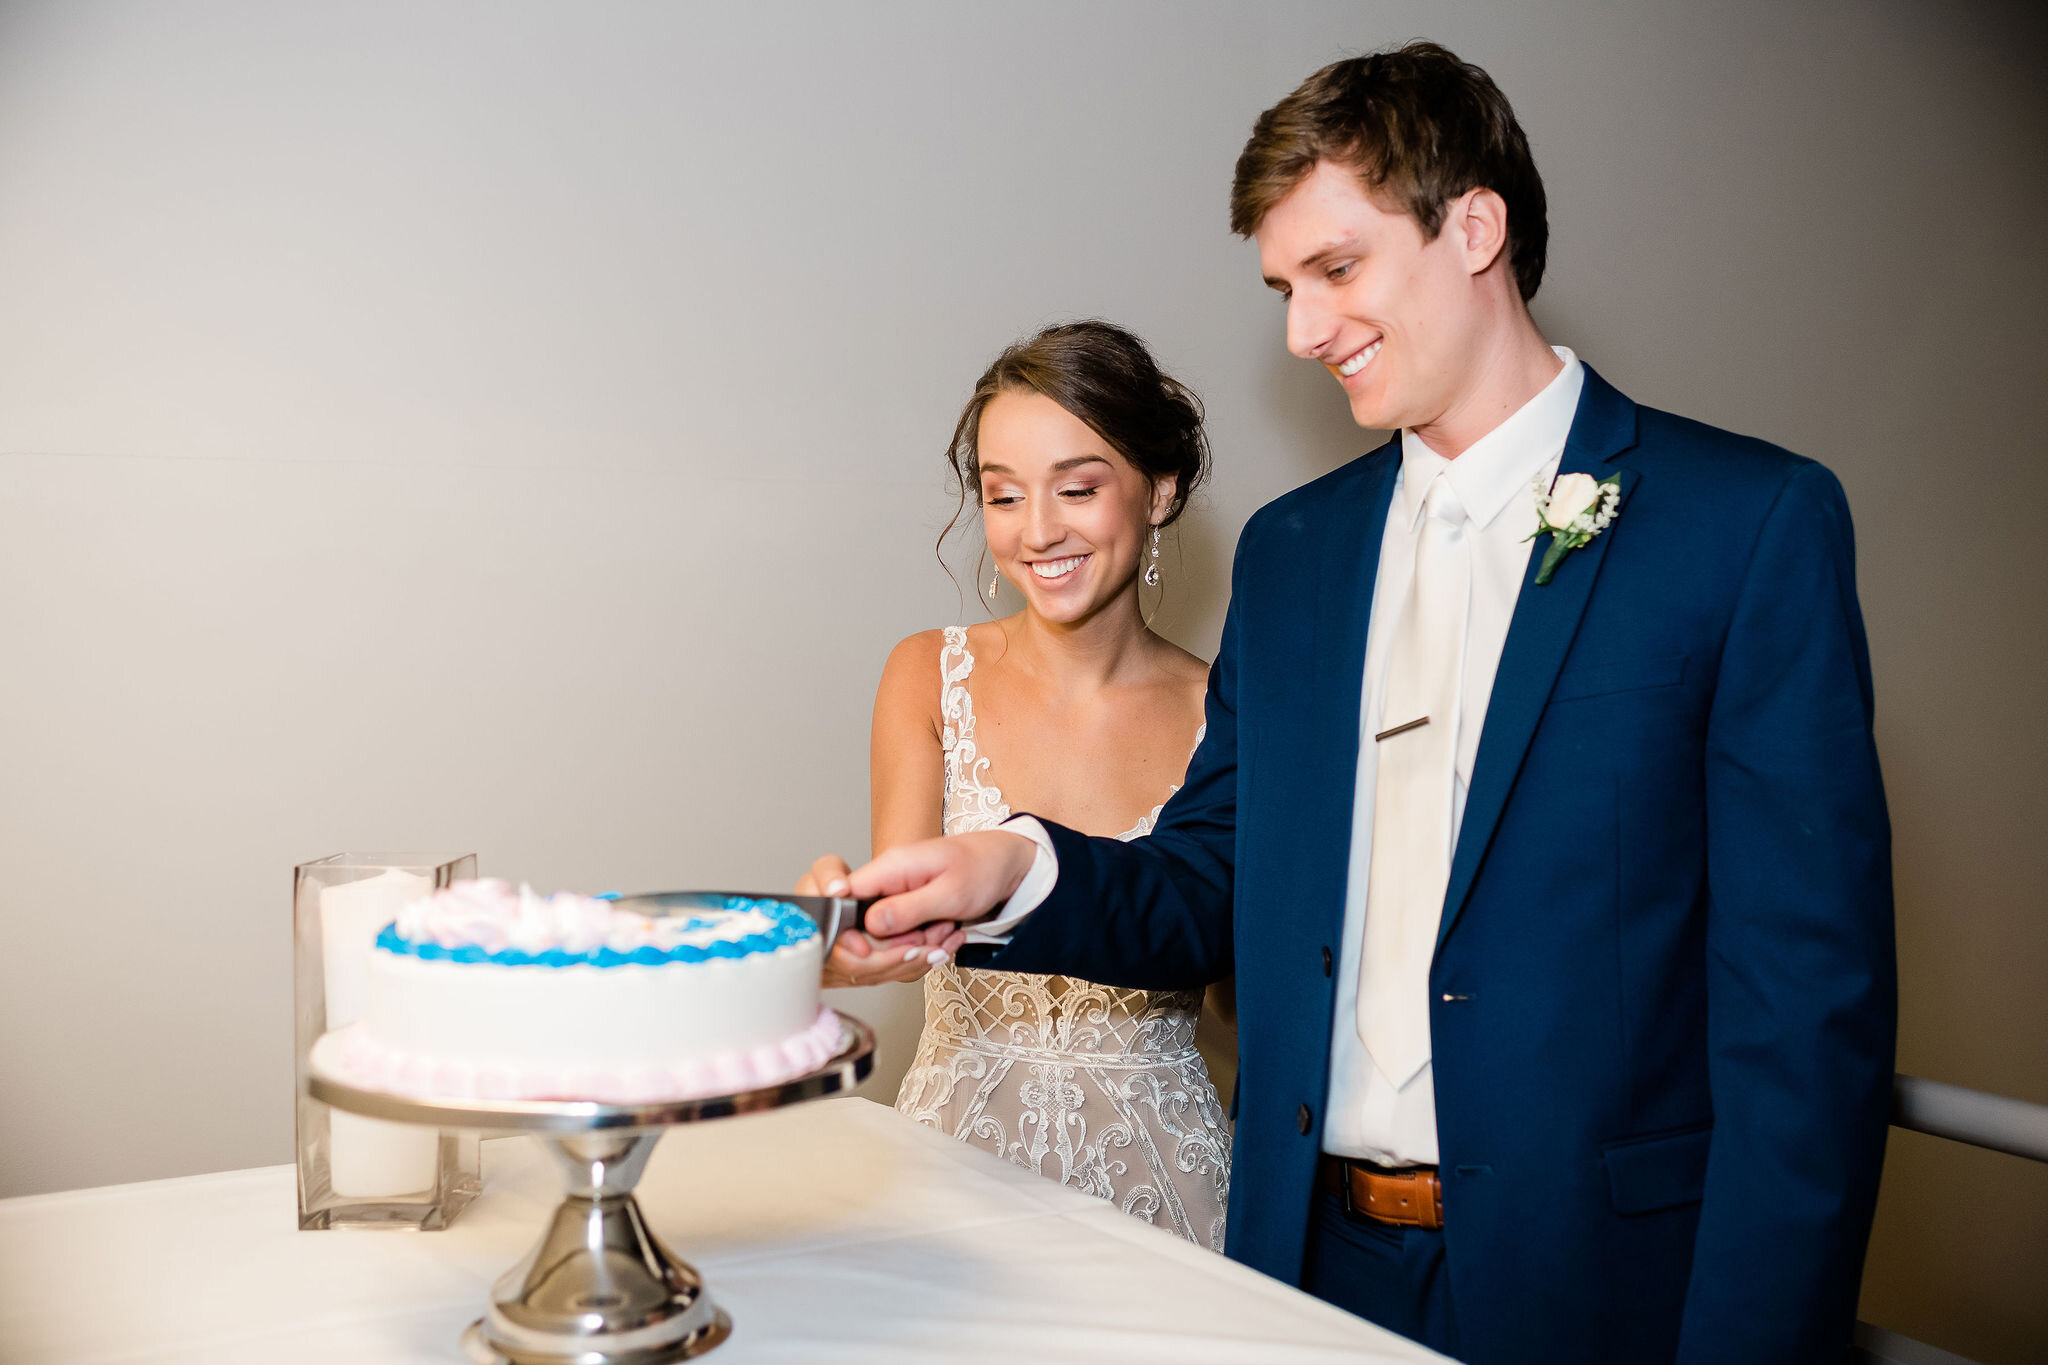 Bride and groom cutting Dairy Queen ice cream cake